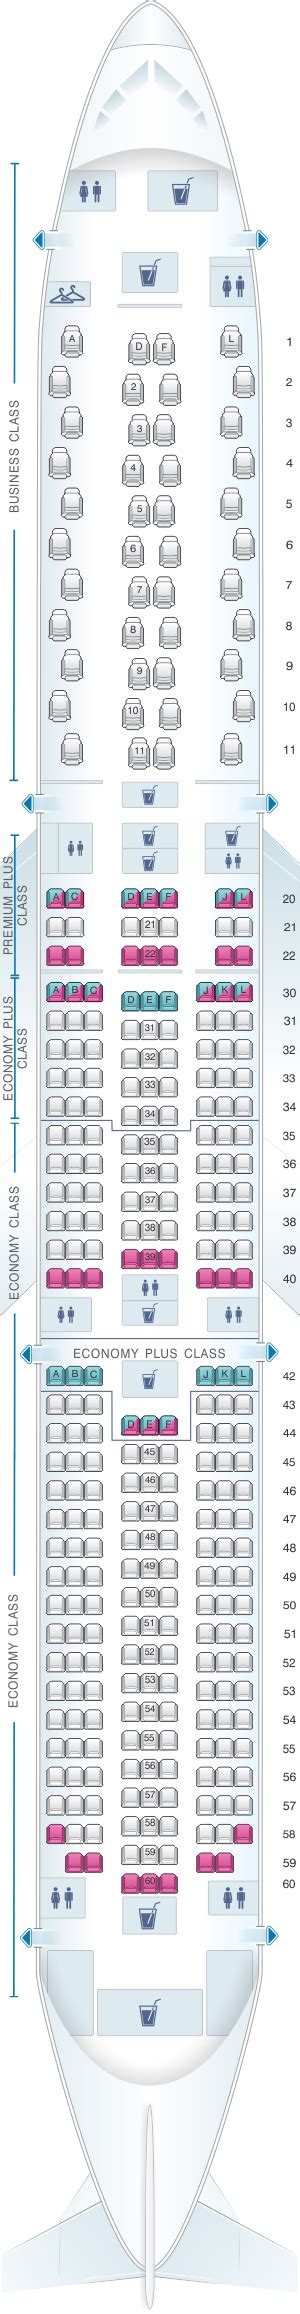 united boeing 787 10 seat map